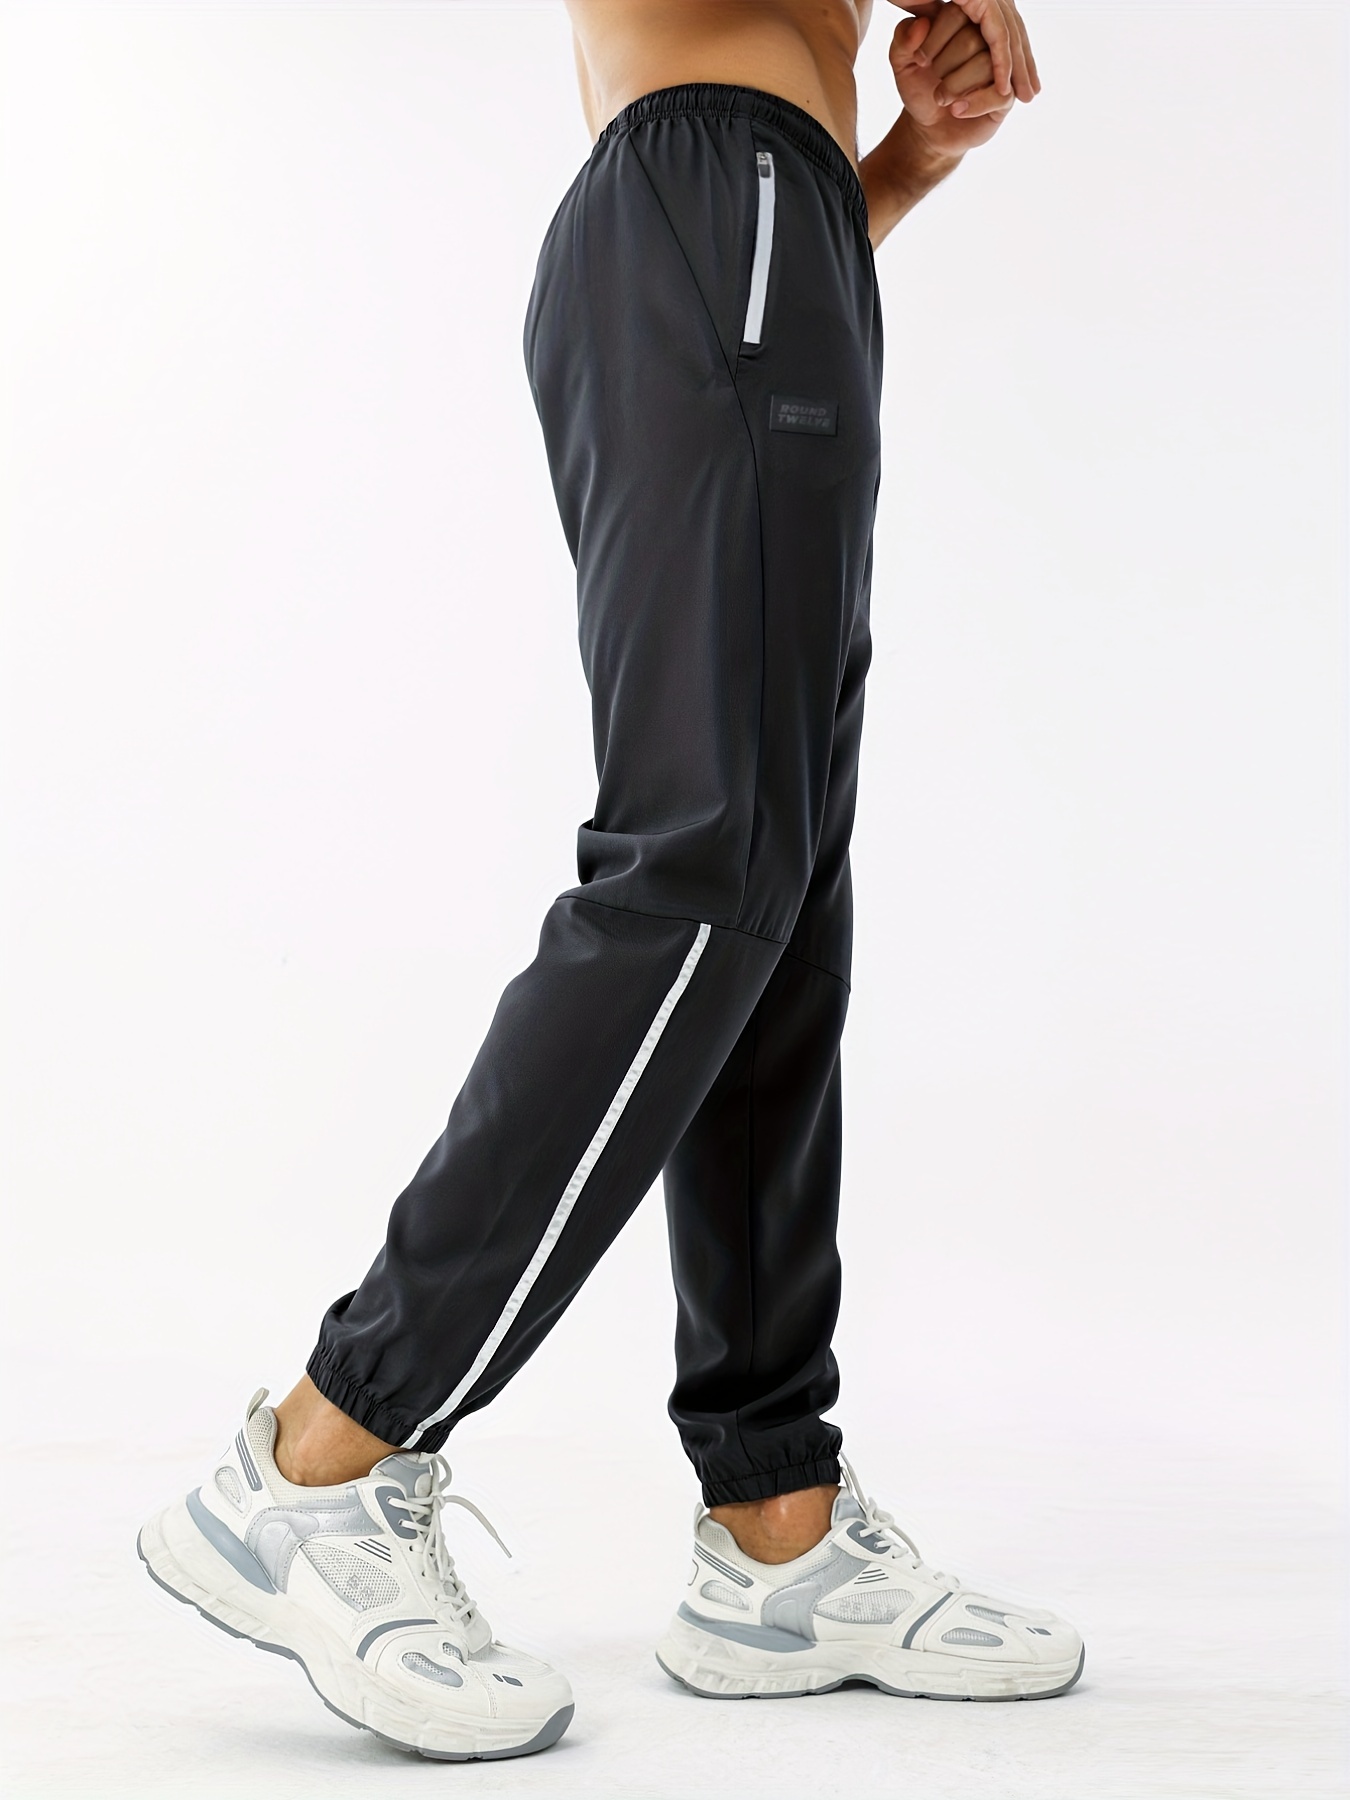 Summer Quick-dry, Baggy Sweatpants for Men. Gents Sportswear, Jogger Pants  with Zip Pockets - M / Style A Grey